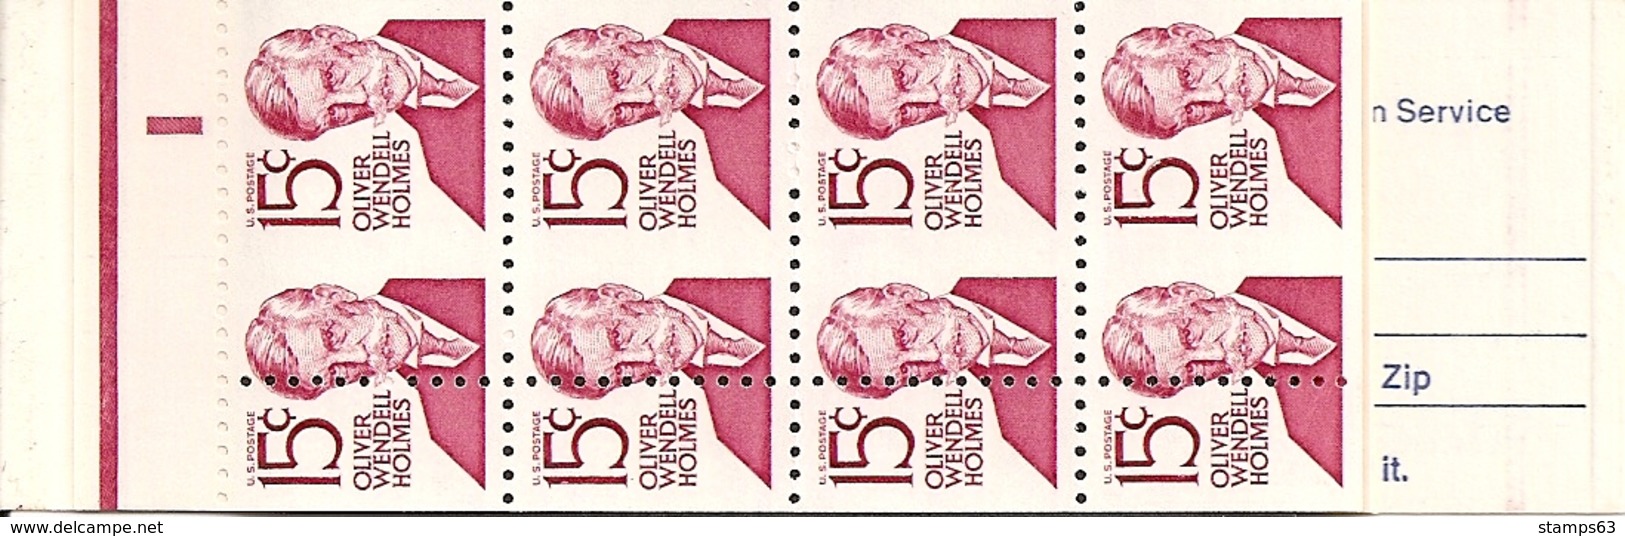 UNITED STATES (USA), 1978, Booklet 117A, $3.60,  Michel 0-95, Holmes, MISPERFORATION - 1941-80